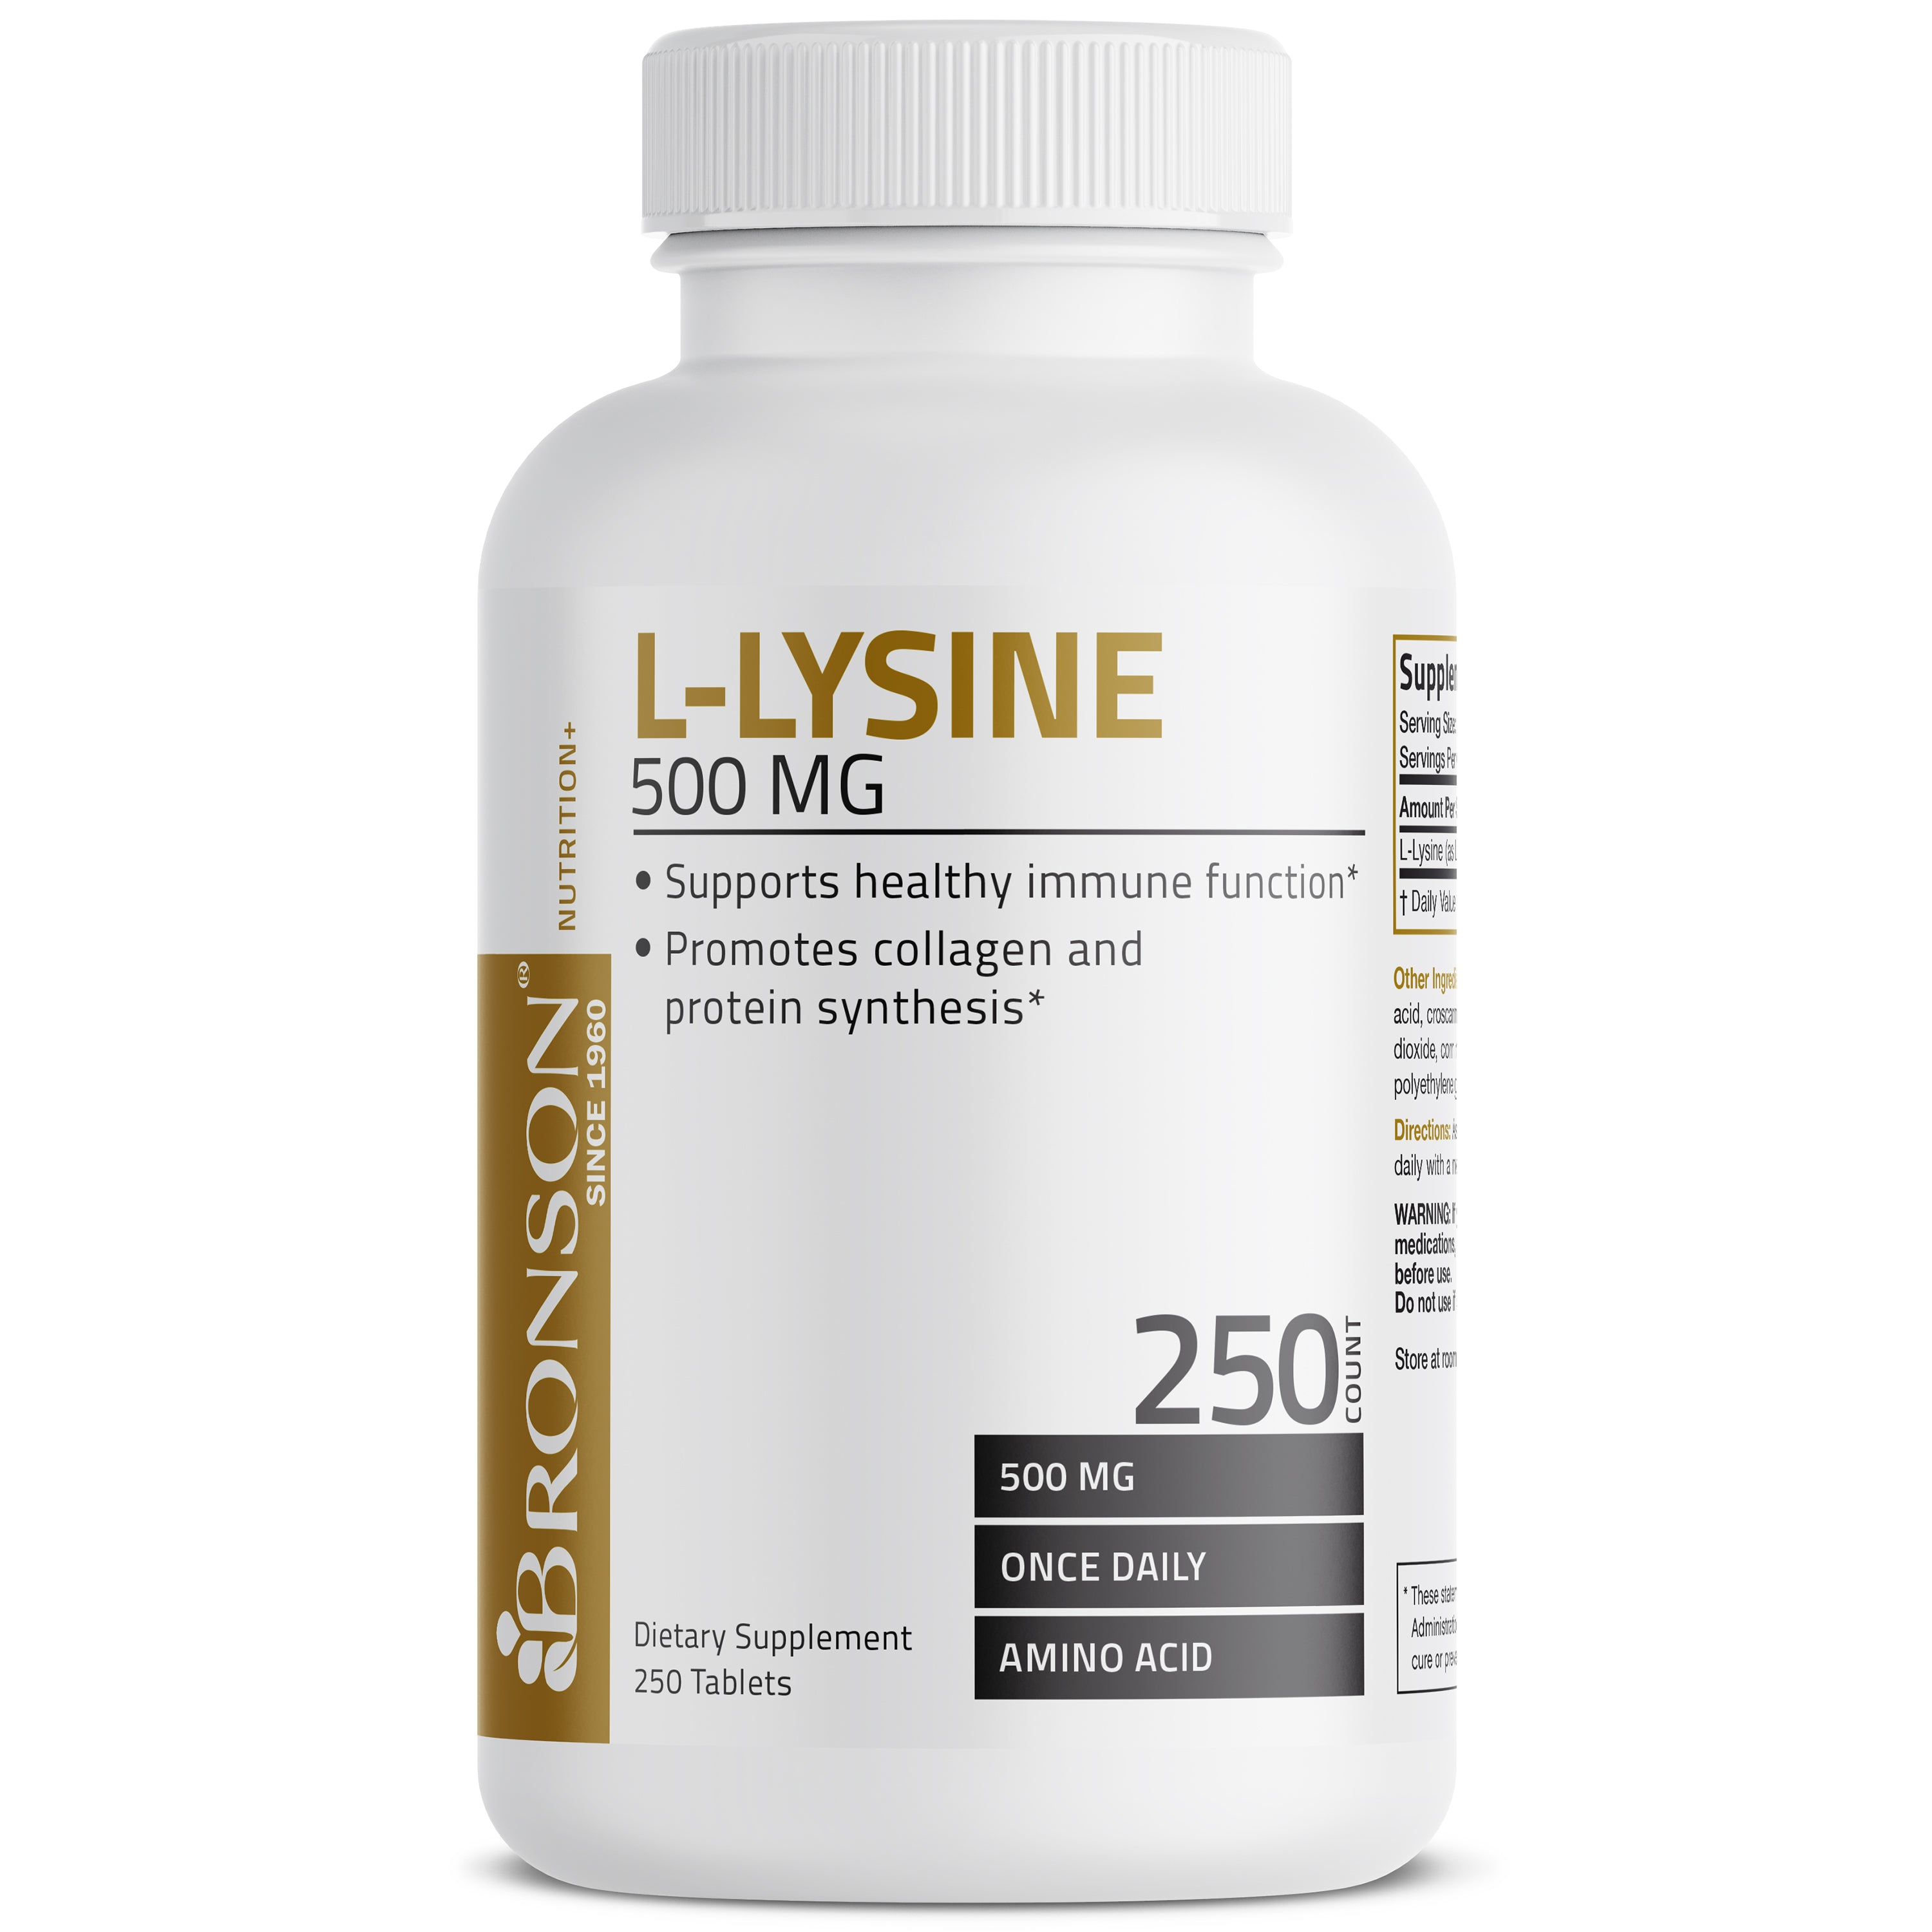 L-Lysine - 500 mg - 250 Tablets view 1 of 4